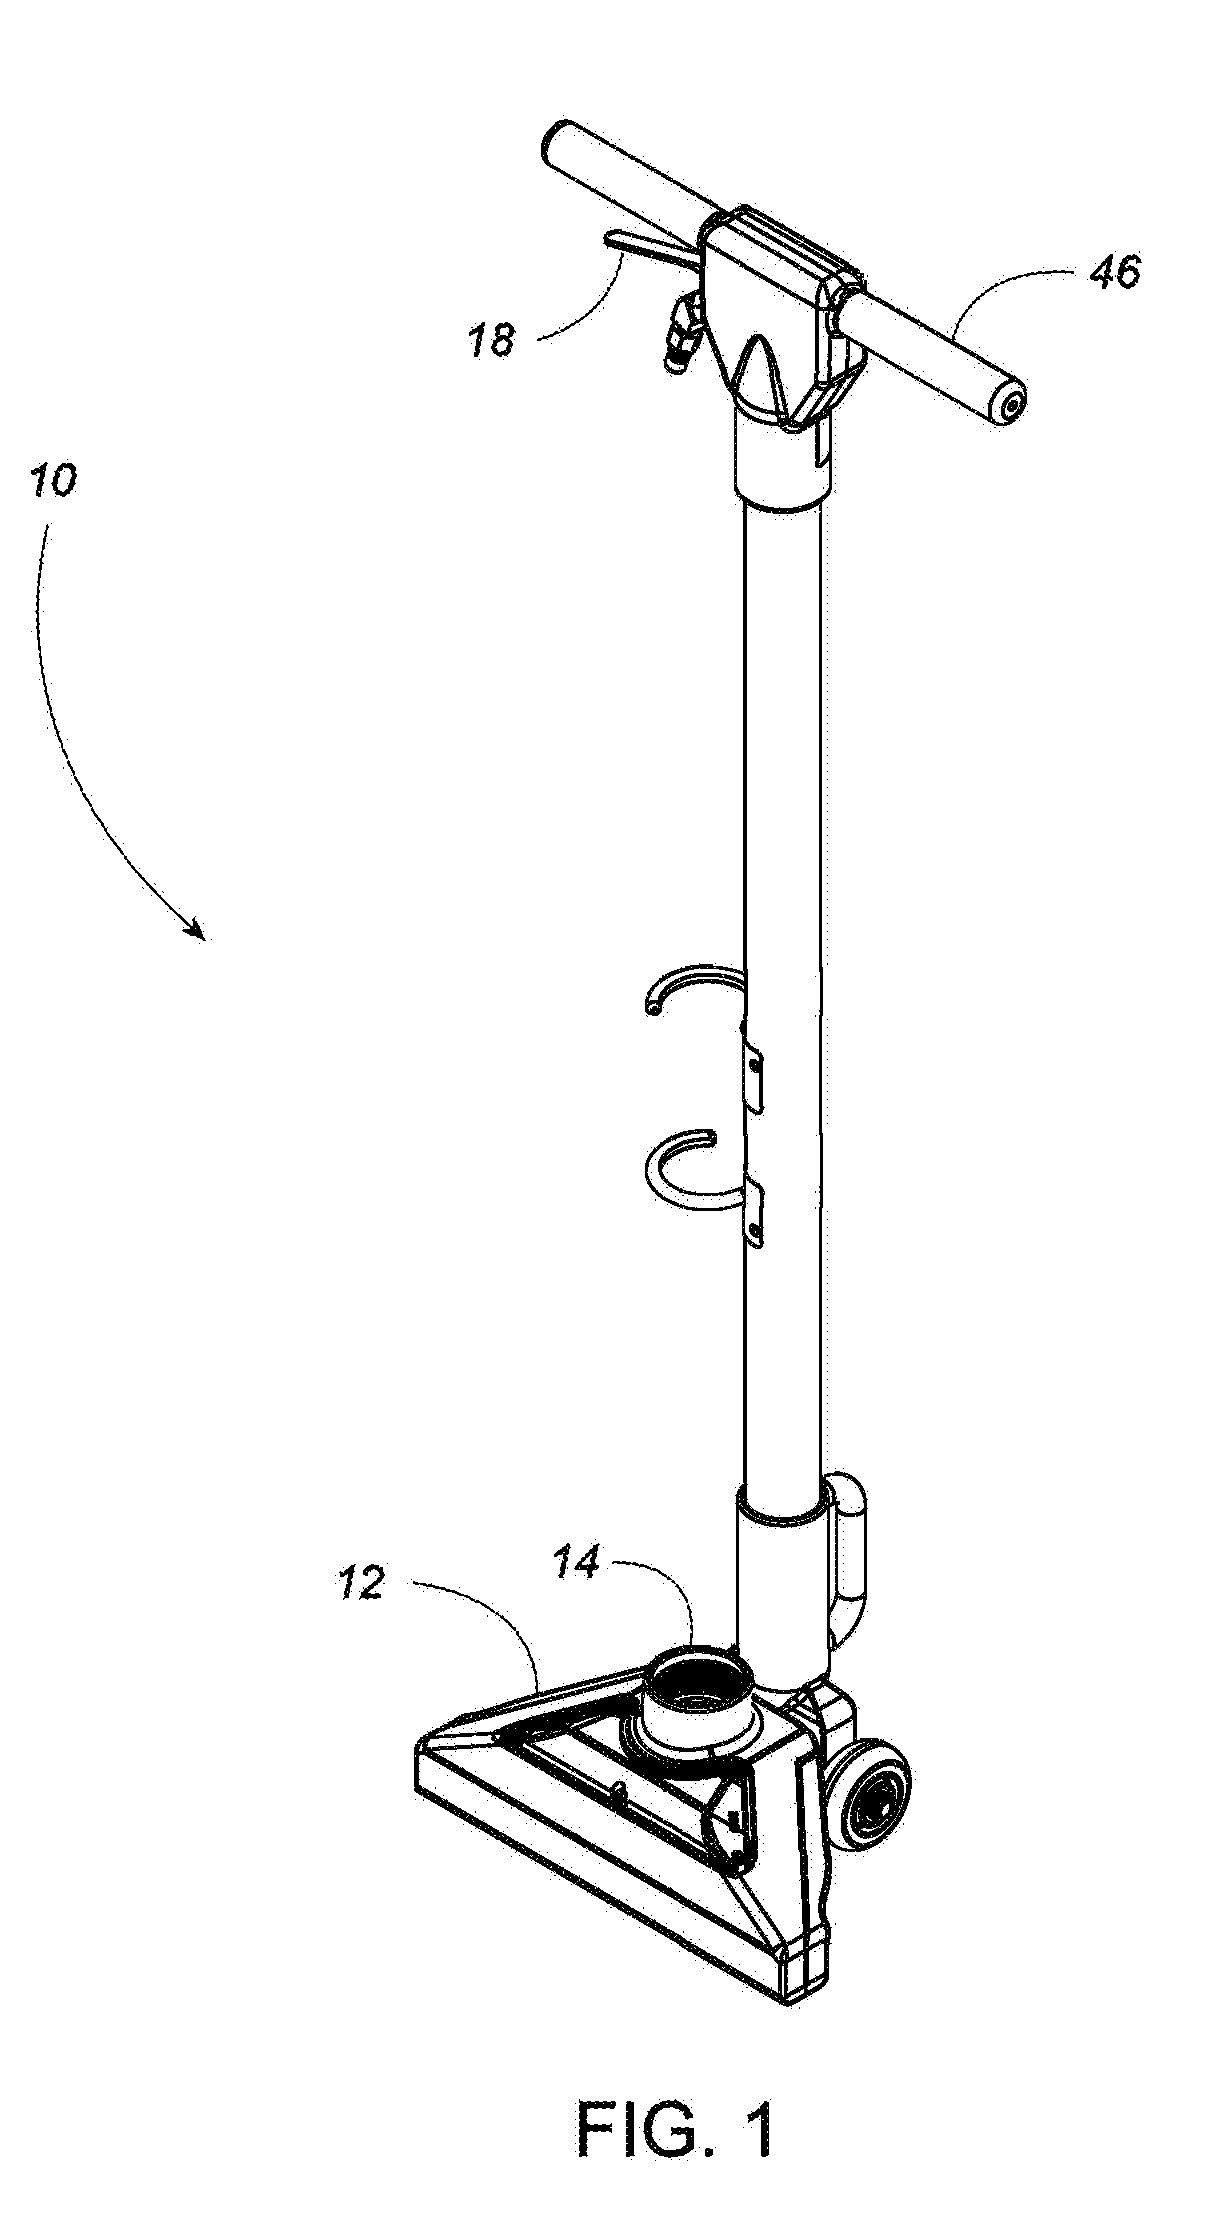 Surface cleaning machine having double glide apparatus